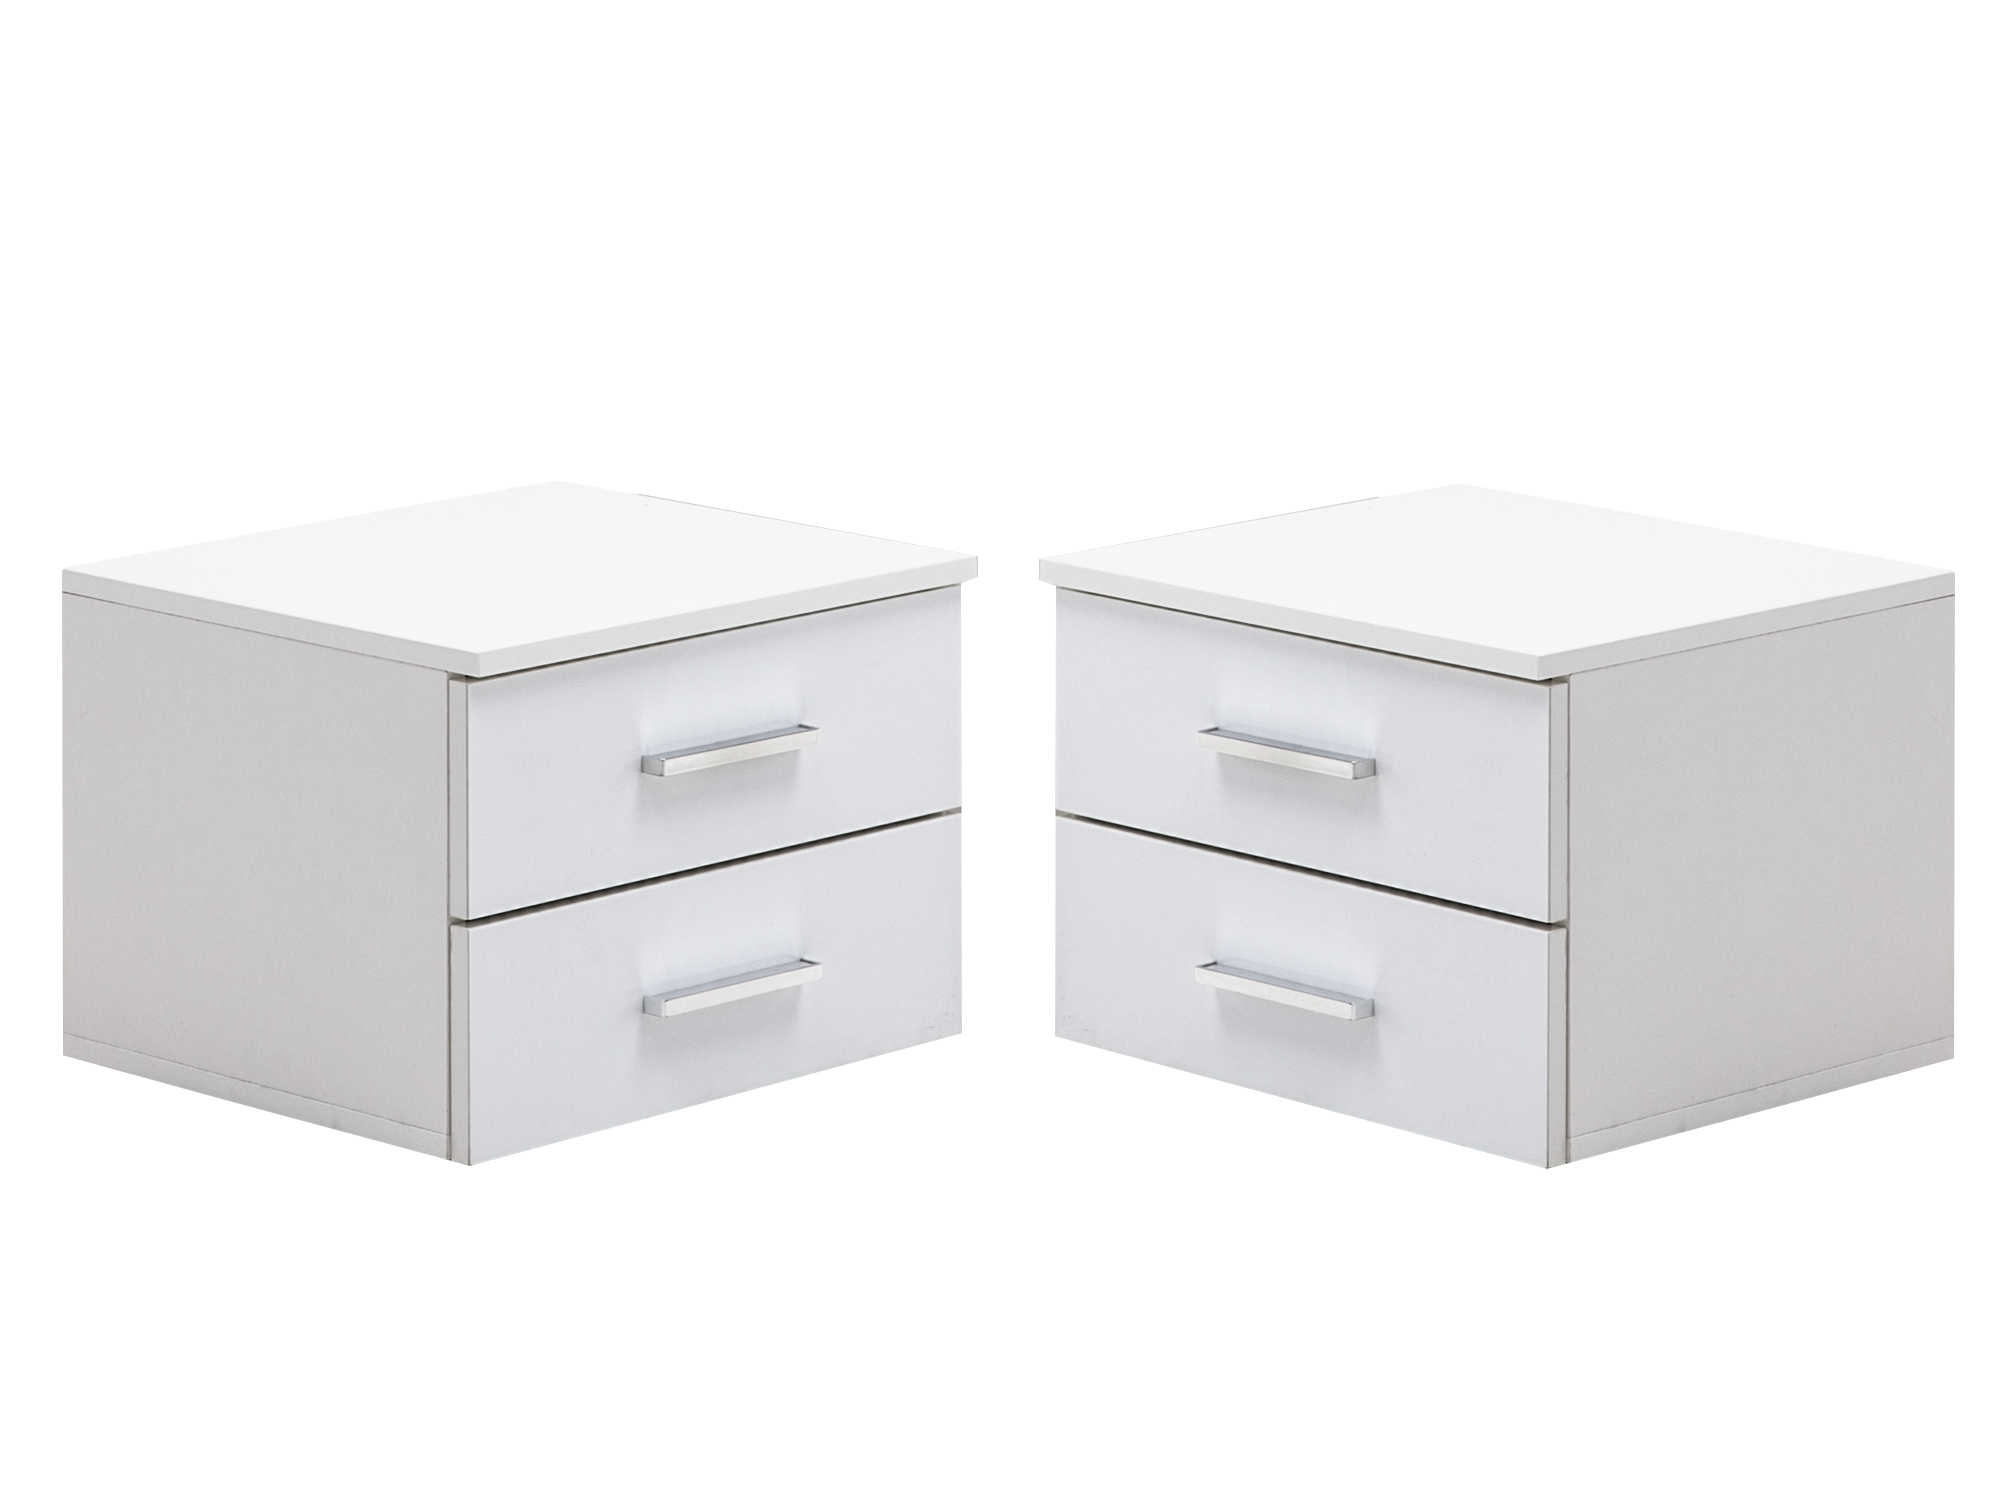 View Siena 23 Pair of Bedside Cabinets information